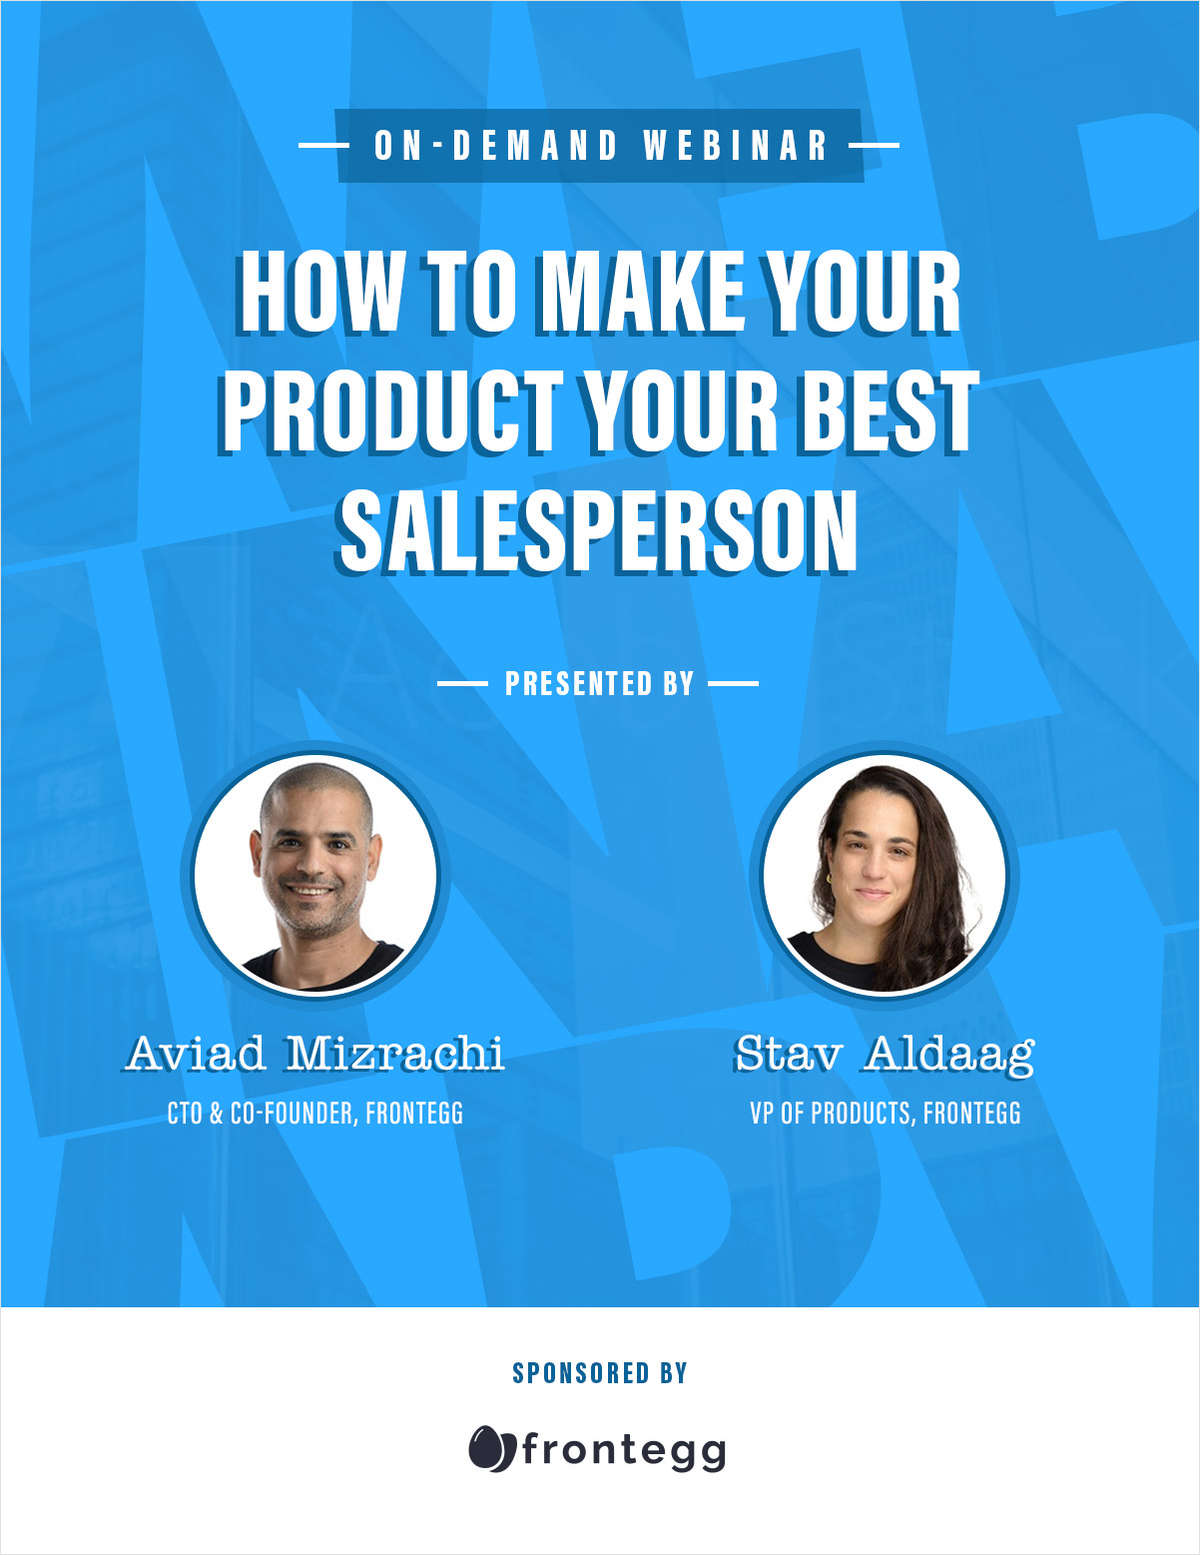 How to Make Your Product Your Best Salesperson